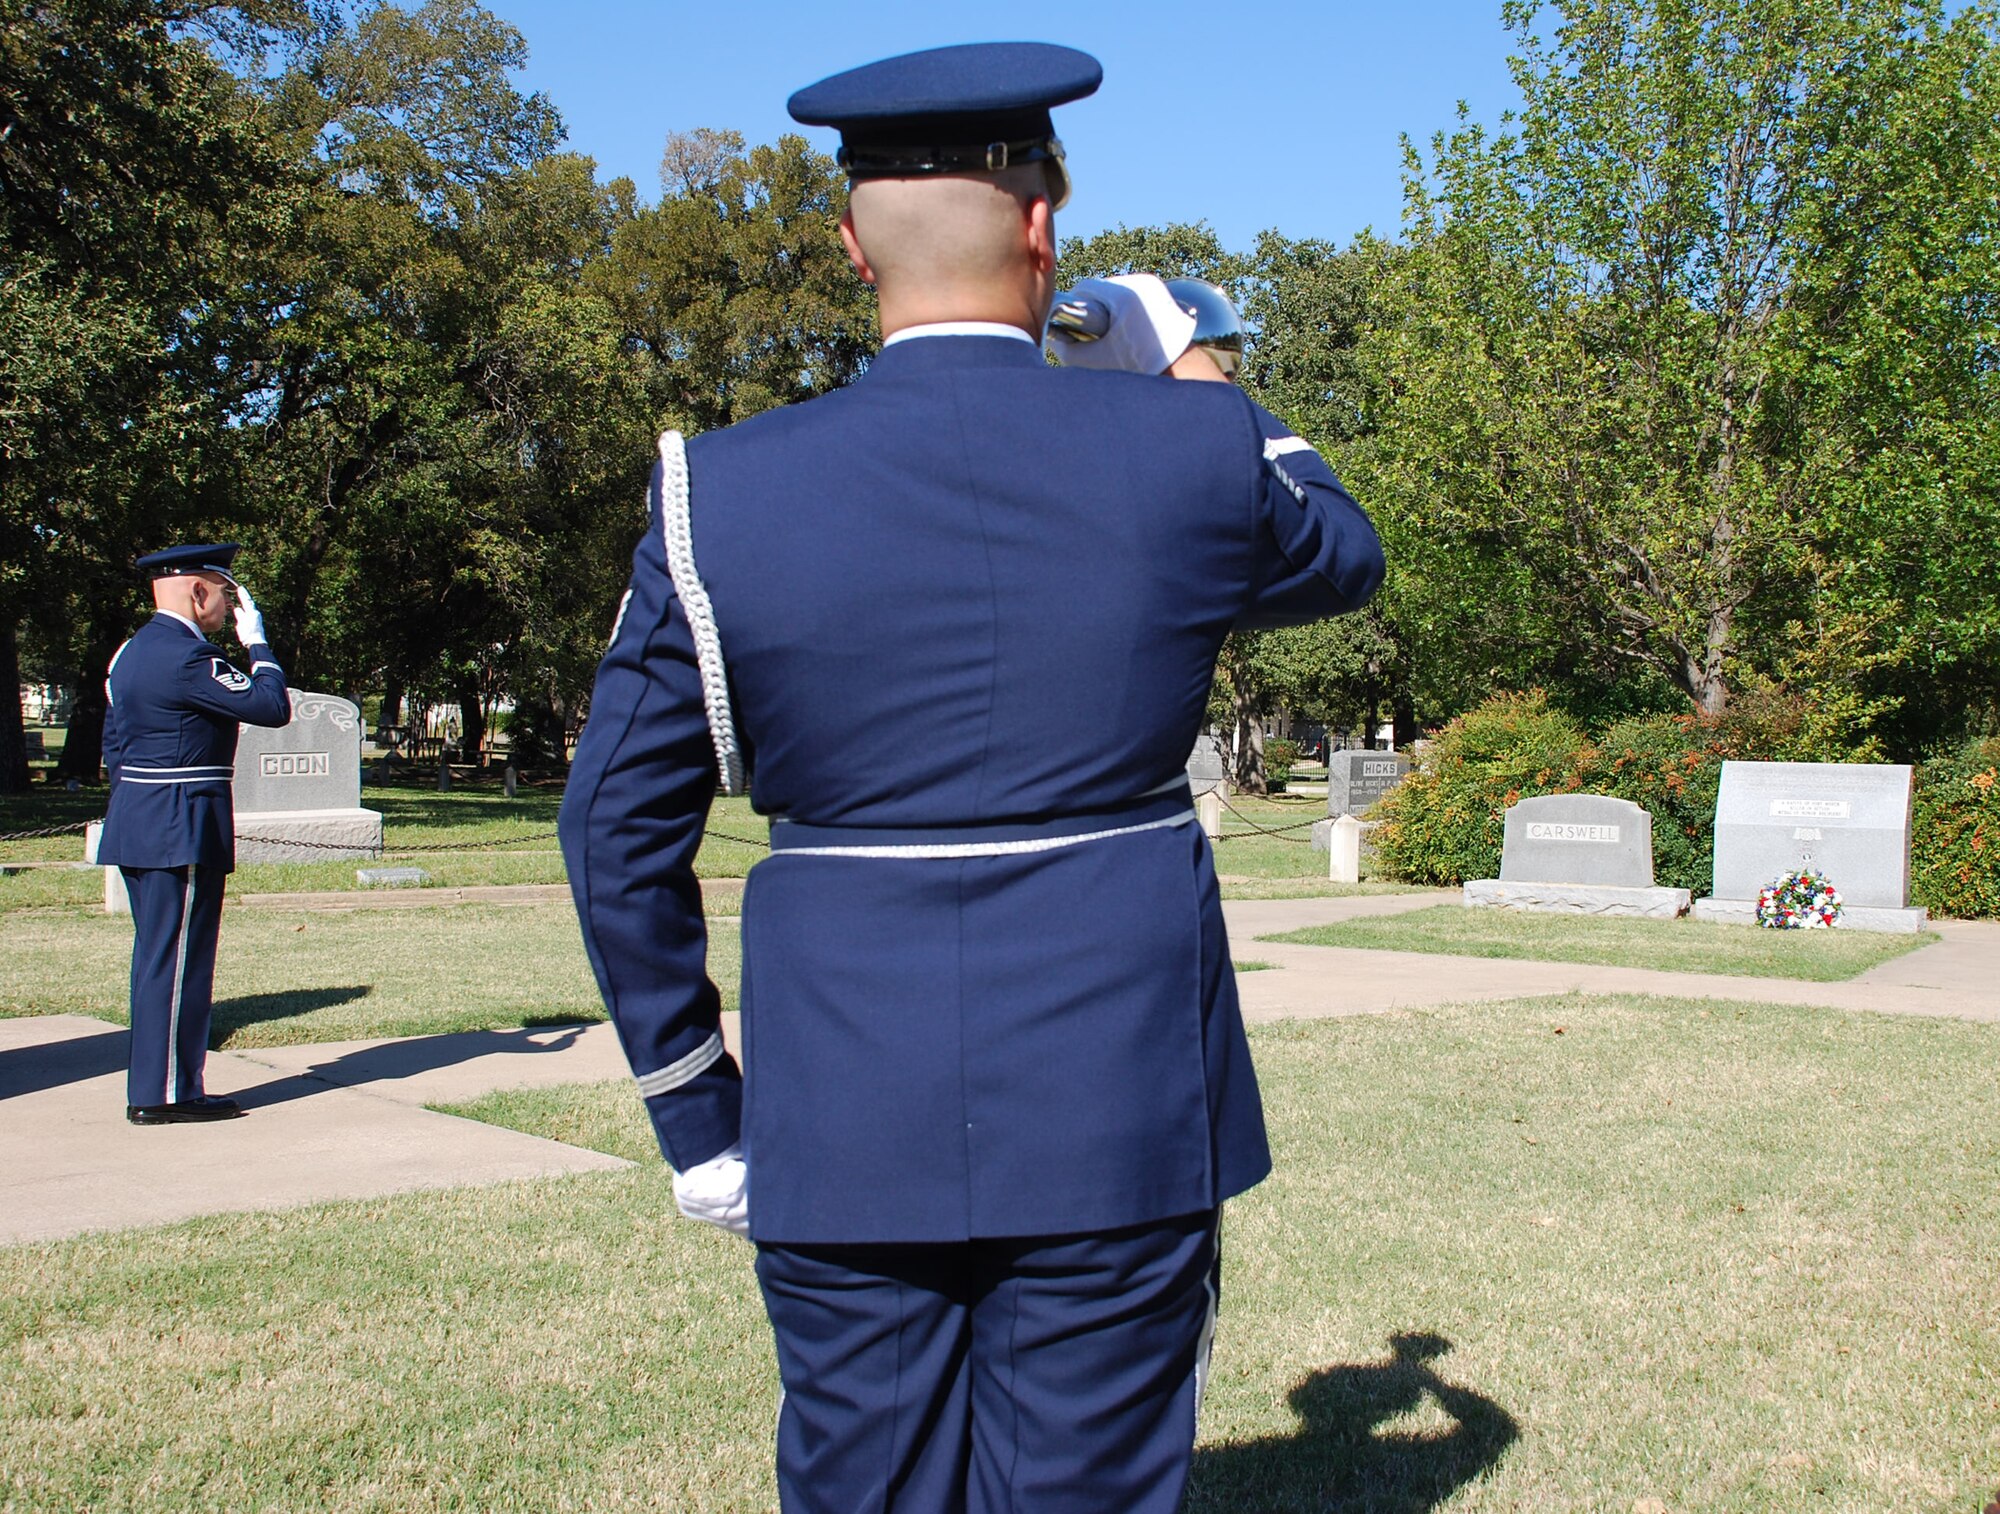 On October 26, two members of the 301st Honor Guard prepared to honor a fallen hero and medal of honor recipient, Major Horace Carswell at Oakwood Cemetery in Fort Worth, Texas. (U.S. Air Force Photo/Tech. Sgt. Julie Briden-Garcia)